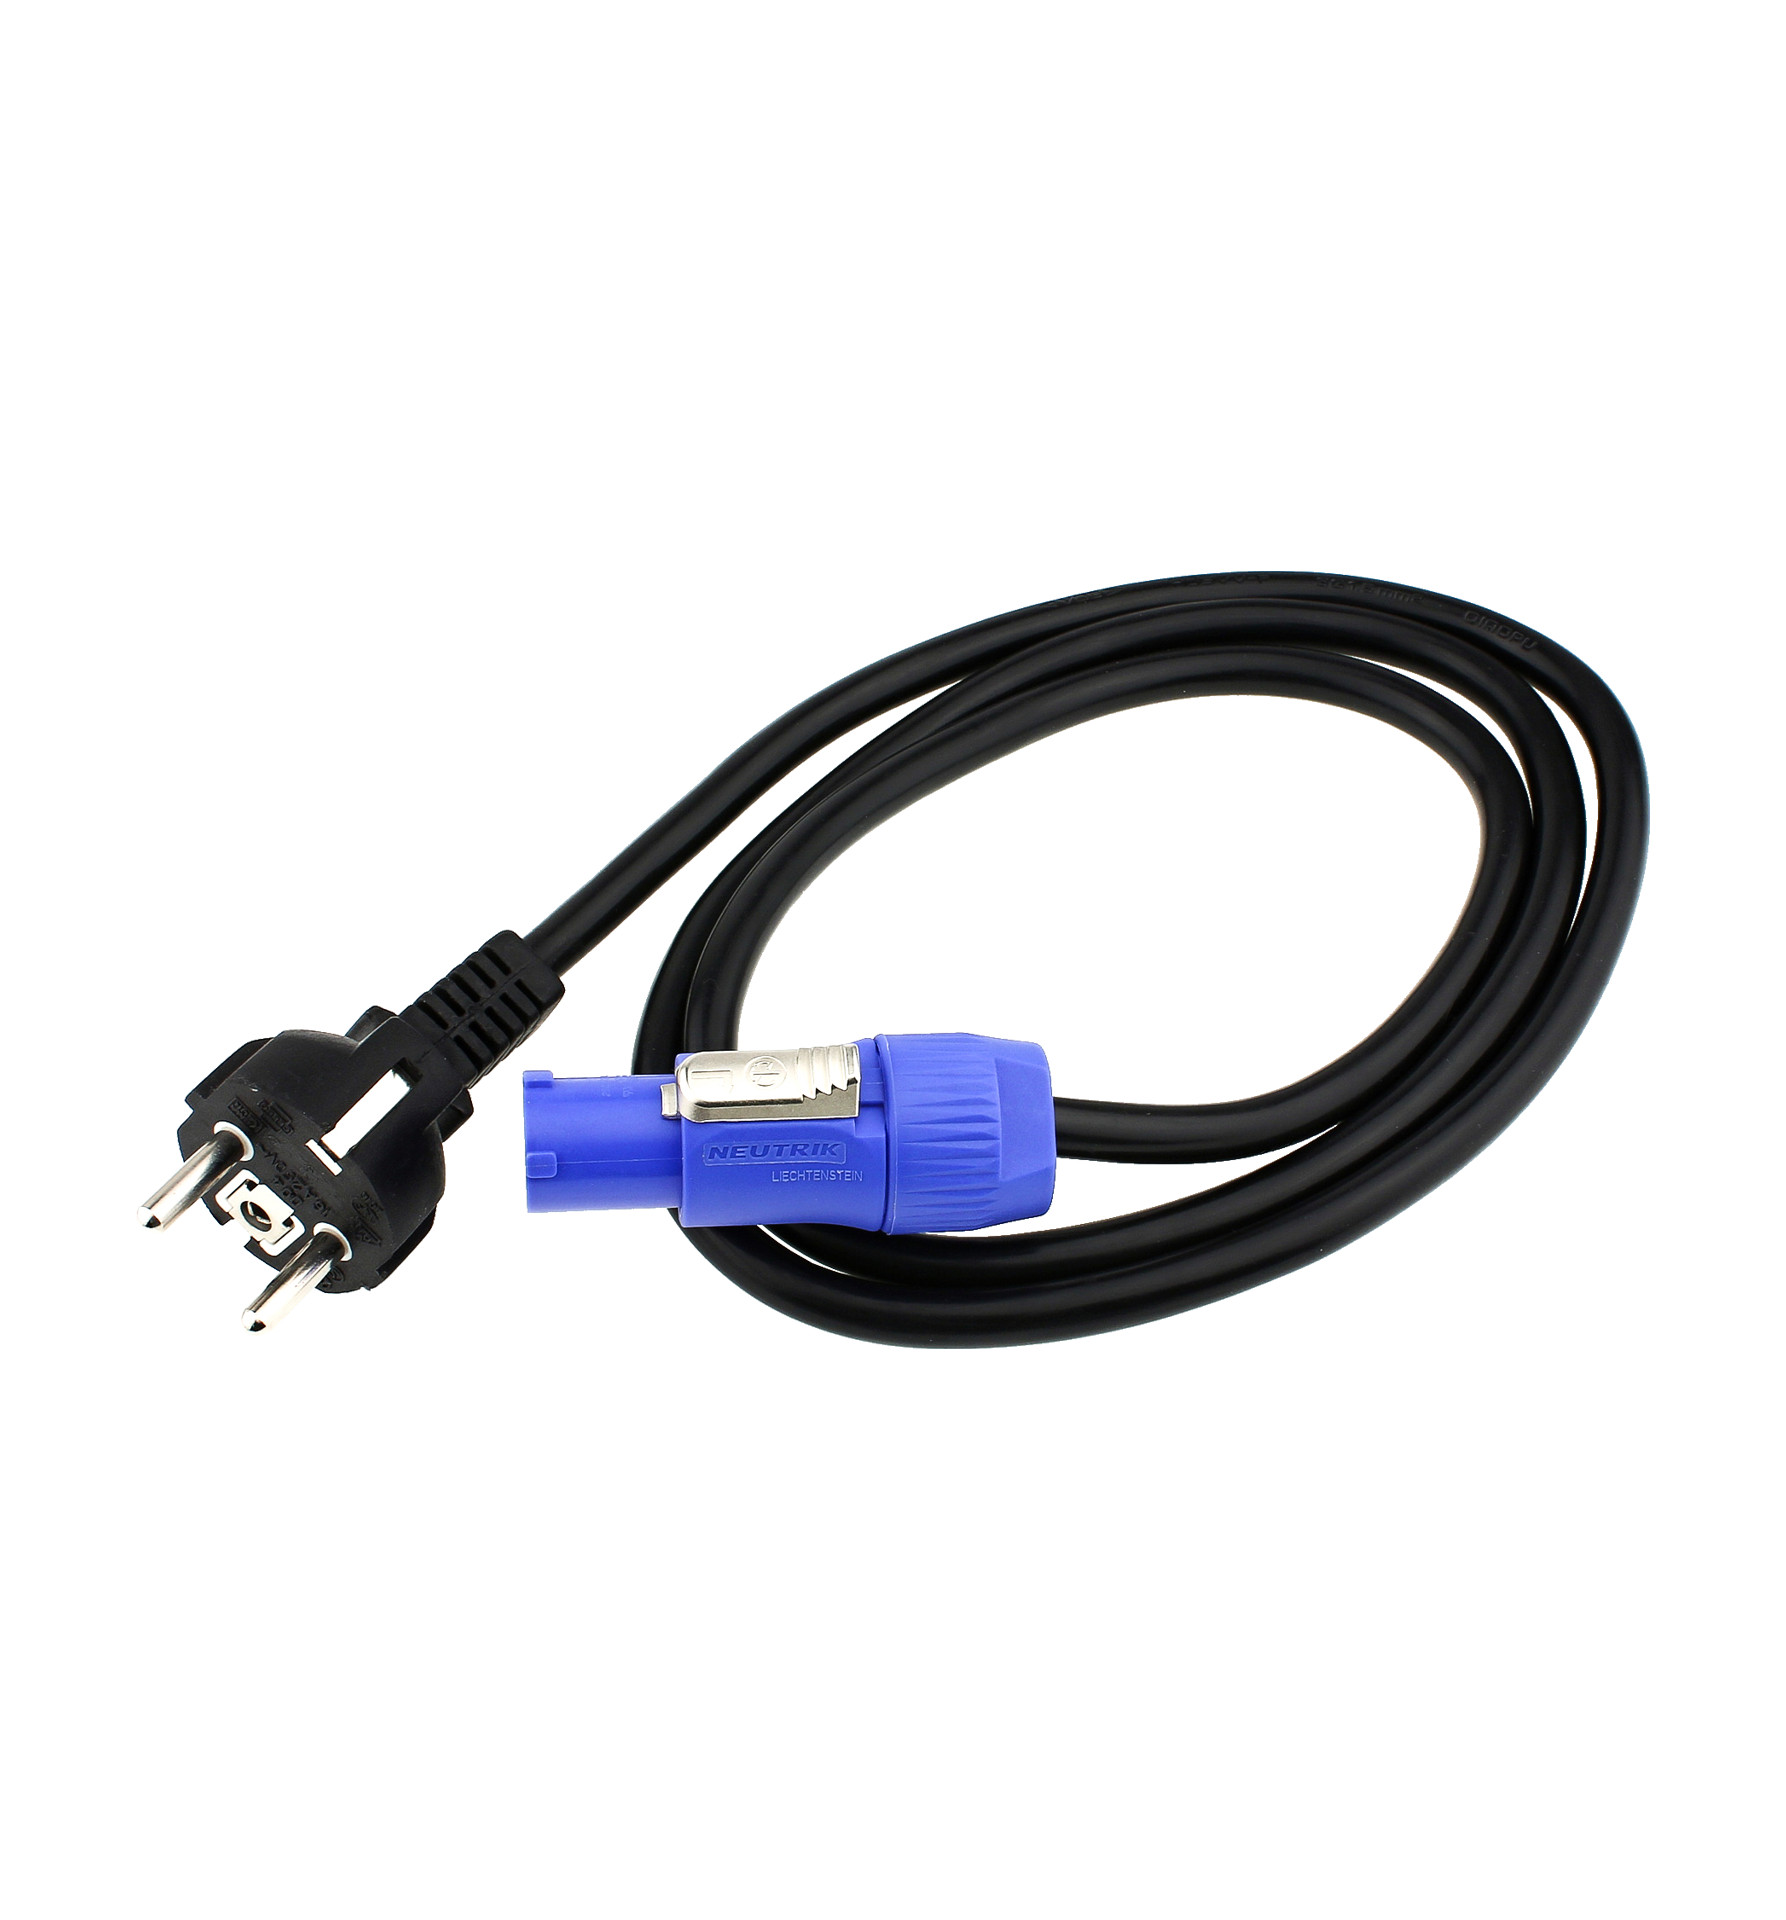 Силовые кабели ROBE Mains Cable PowerCon In/Schuko 2m трансивер сетевой ixia ixia vision transceiver sfp 10g baset 10g copper supports links up to 30m using cat 6a 7 cable